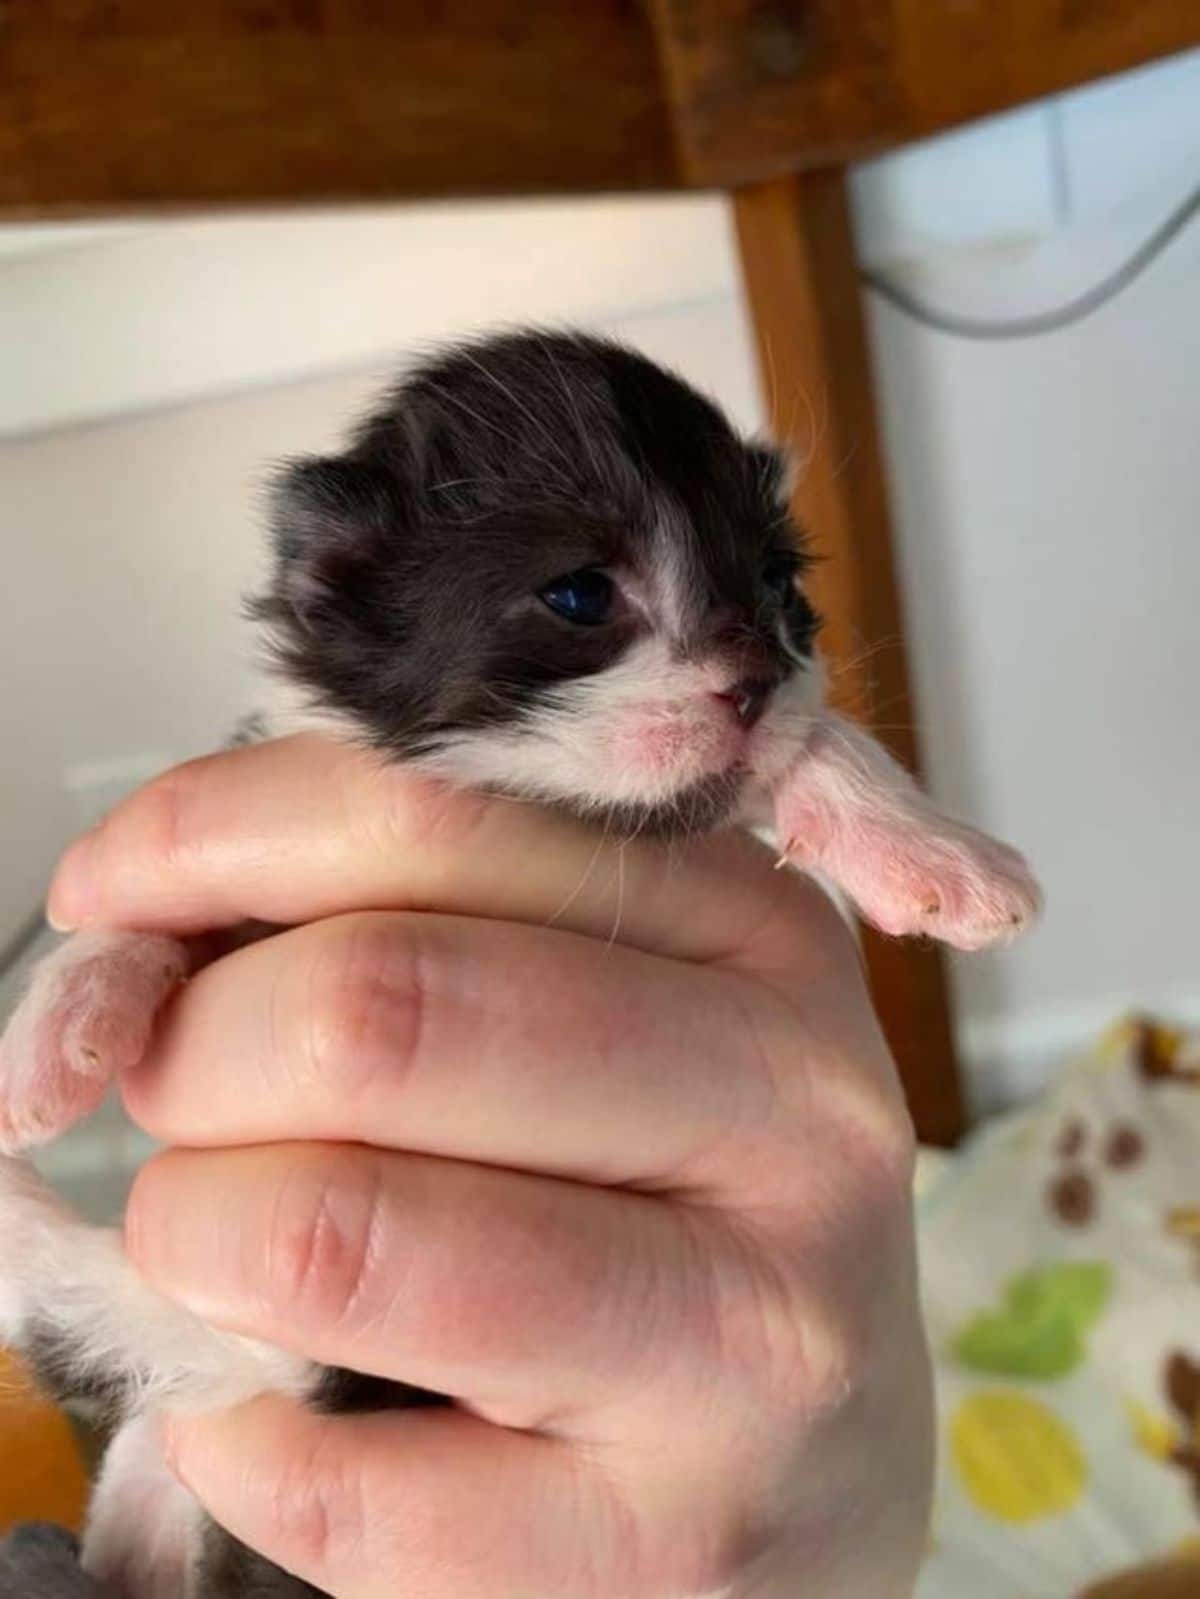 black and white kitten being held in someone's hand